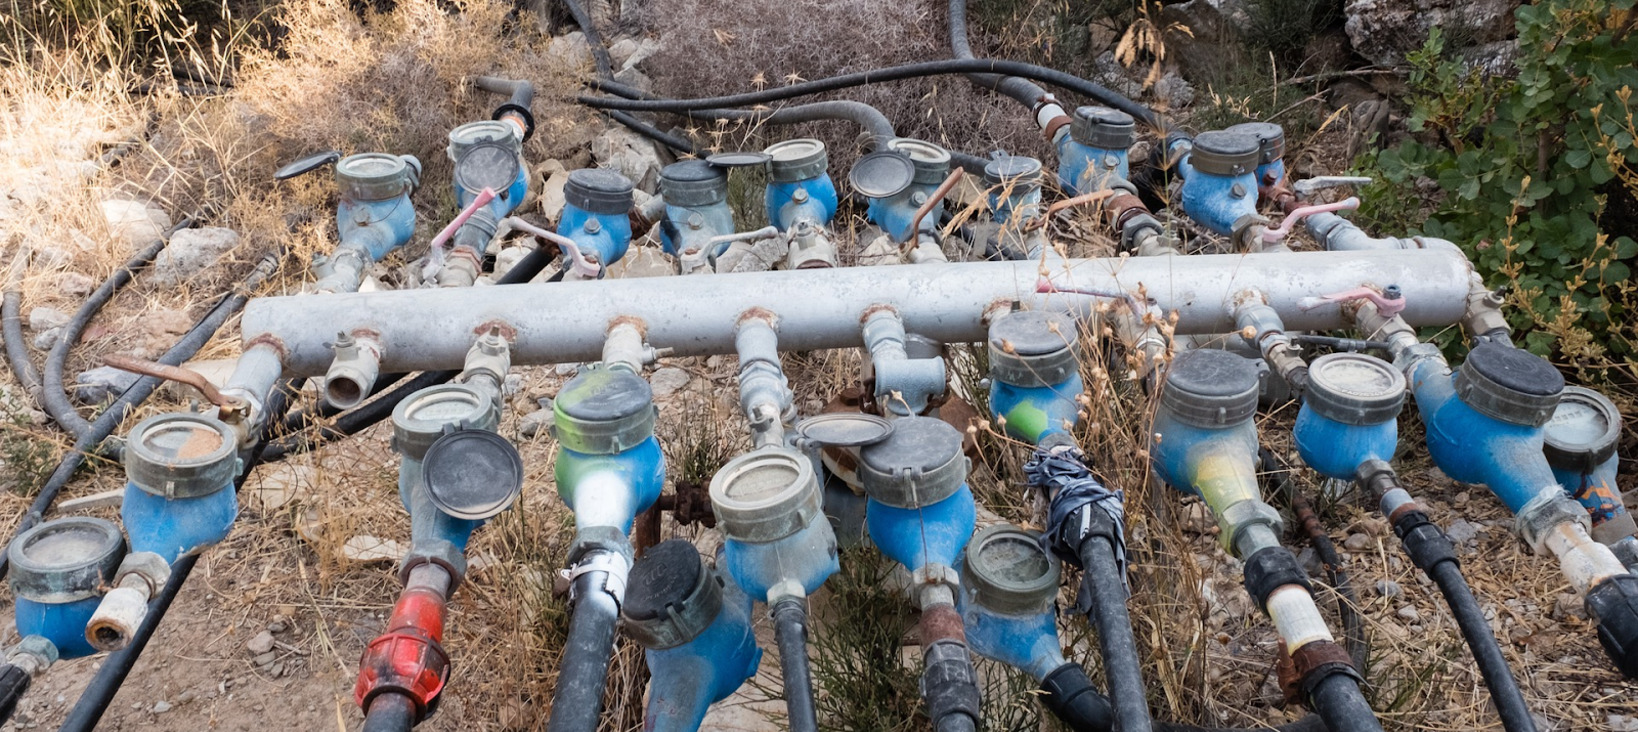 A photo of a large collection of various water valves and pipes, all connected to a white pipe. The assortment of valves and pipes appears fragile and cobbled together.